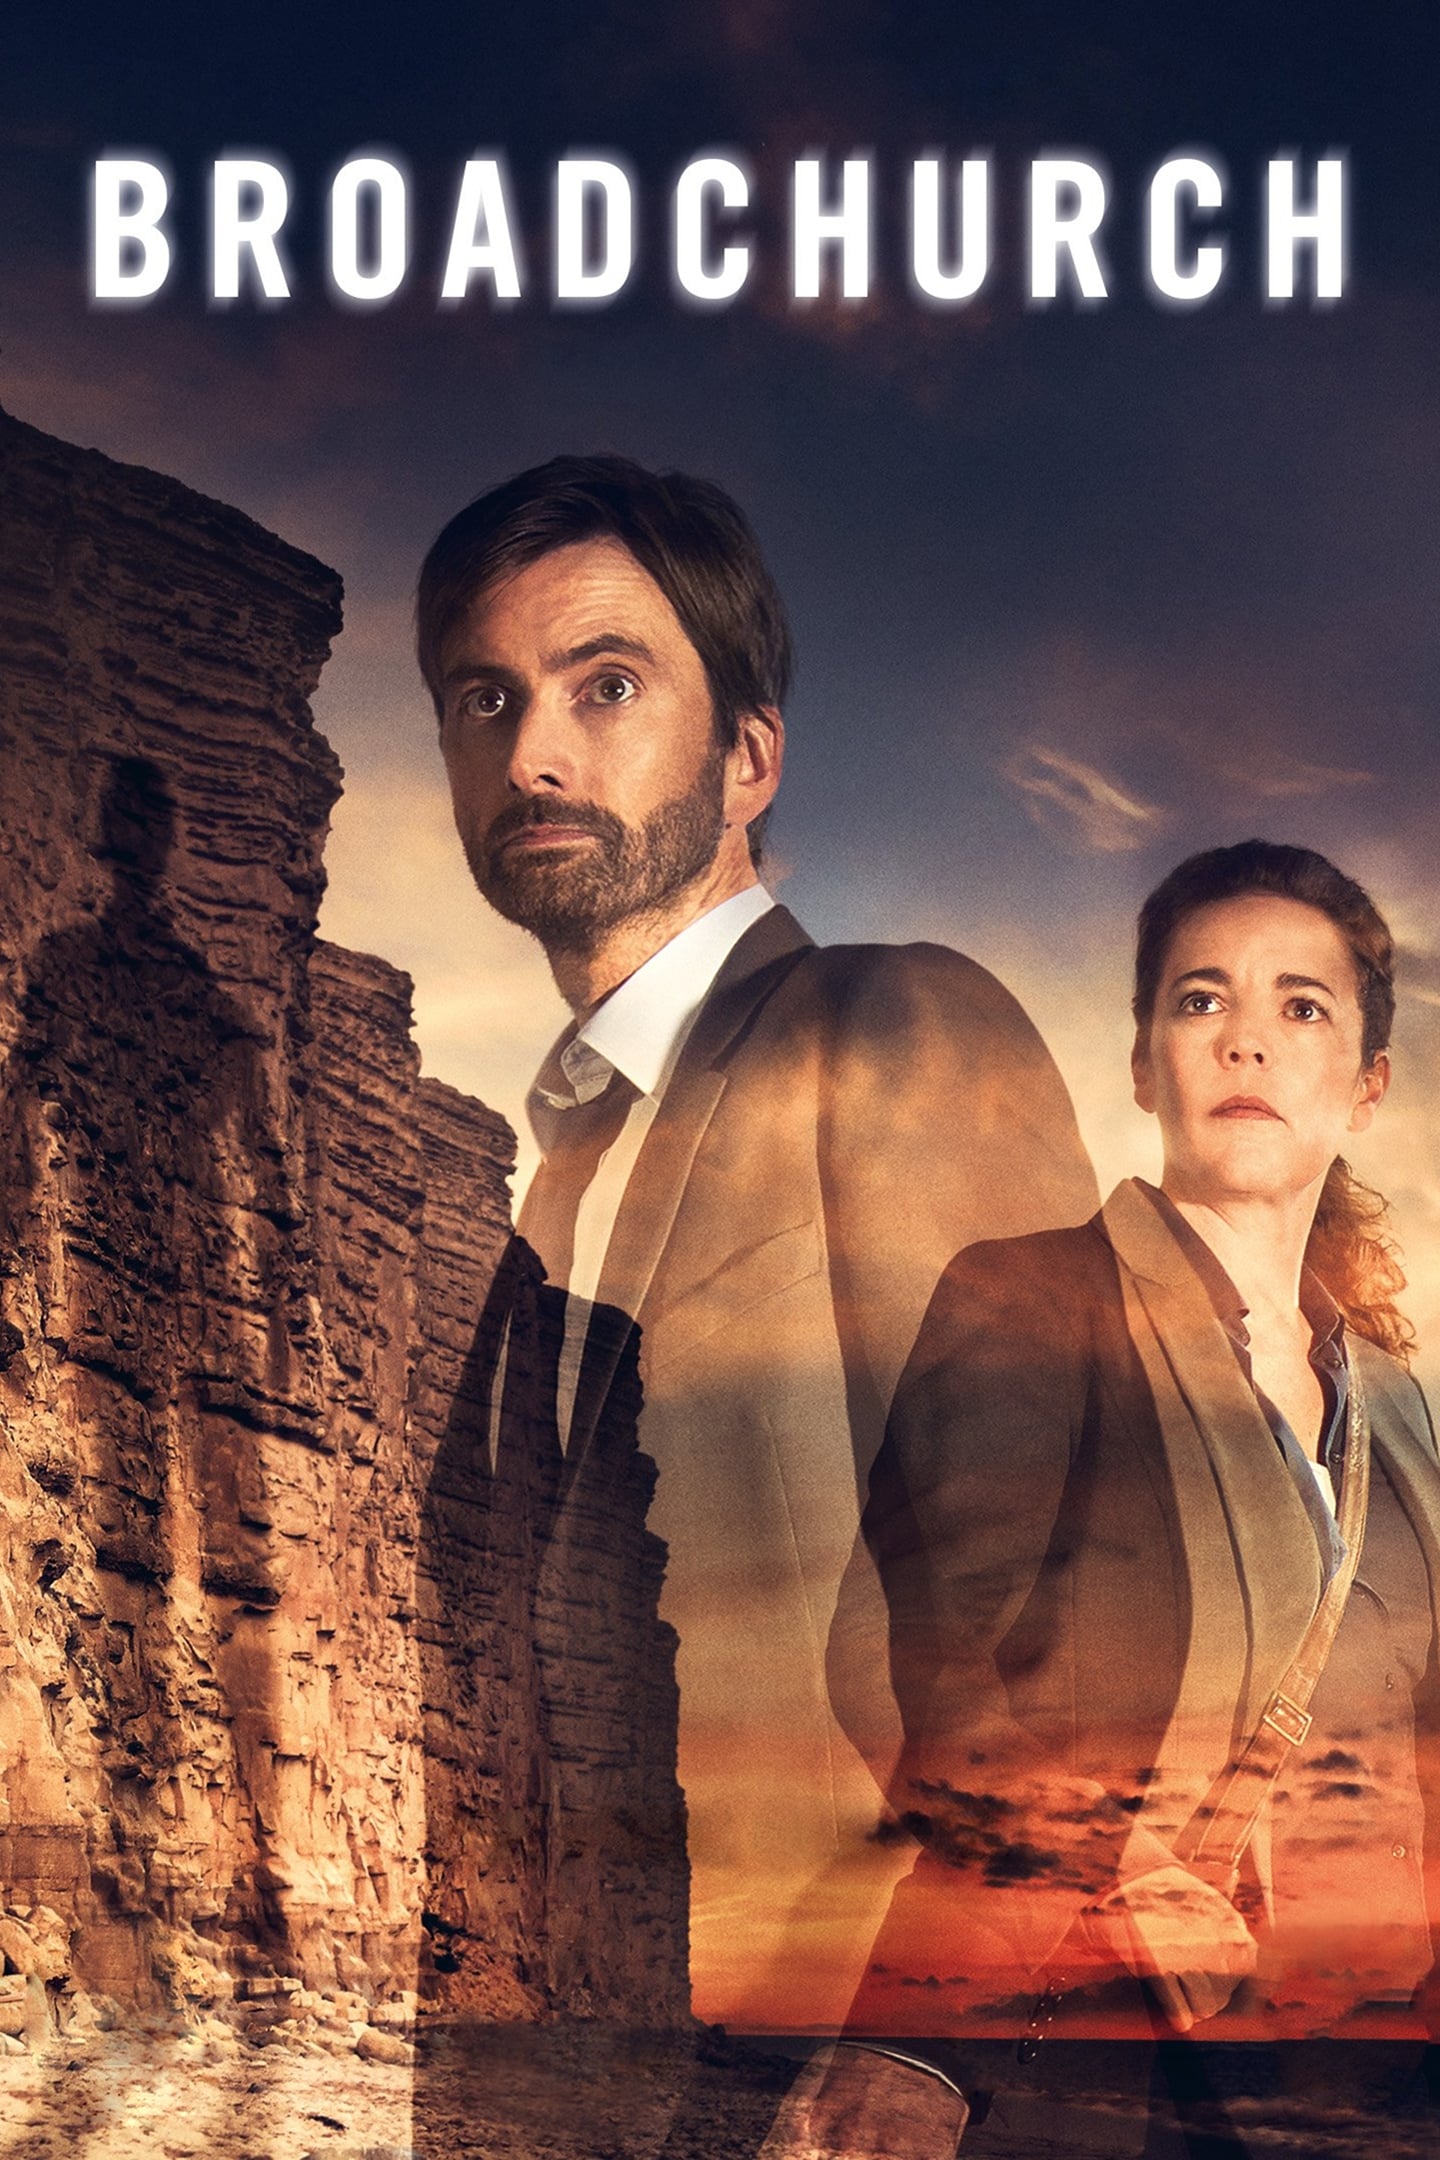 Broadchurch TV Shows About Seaside